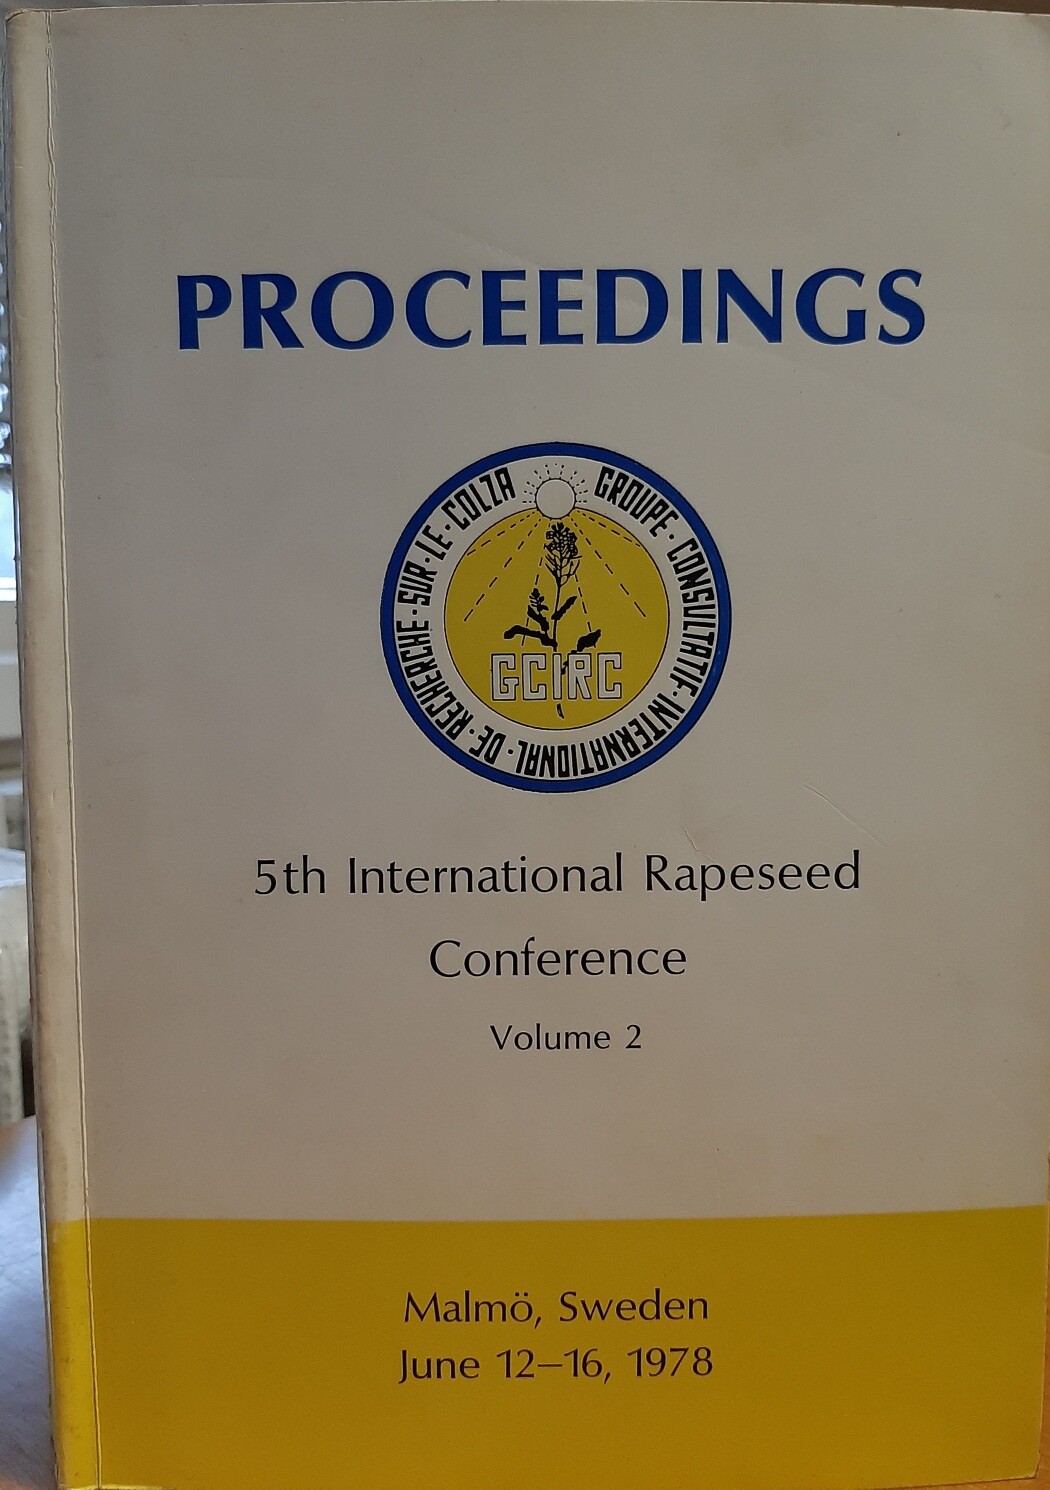 Proceedings of the 5th International Rapeseed Conference Volume 2 (Rippl-Rónai Múzeum CC BY-NC-ND)